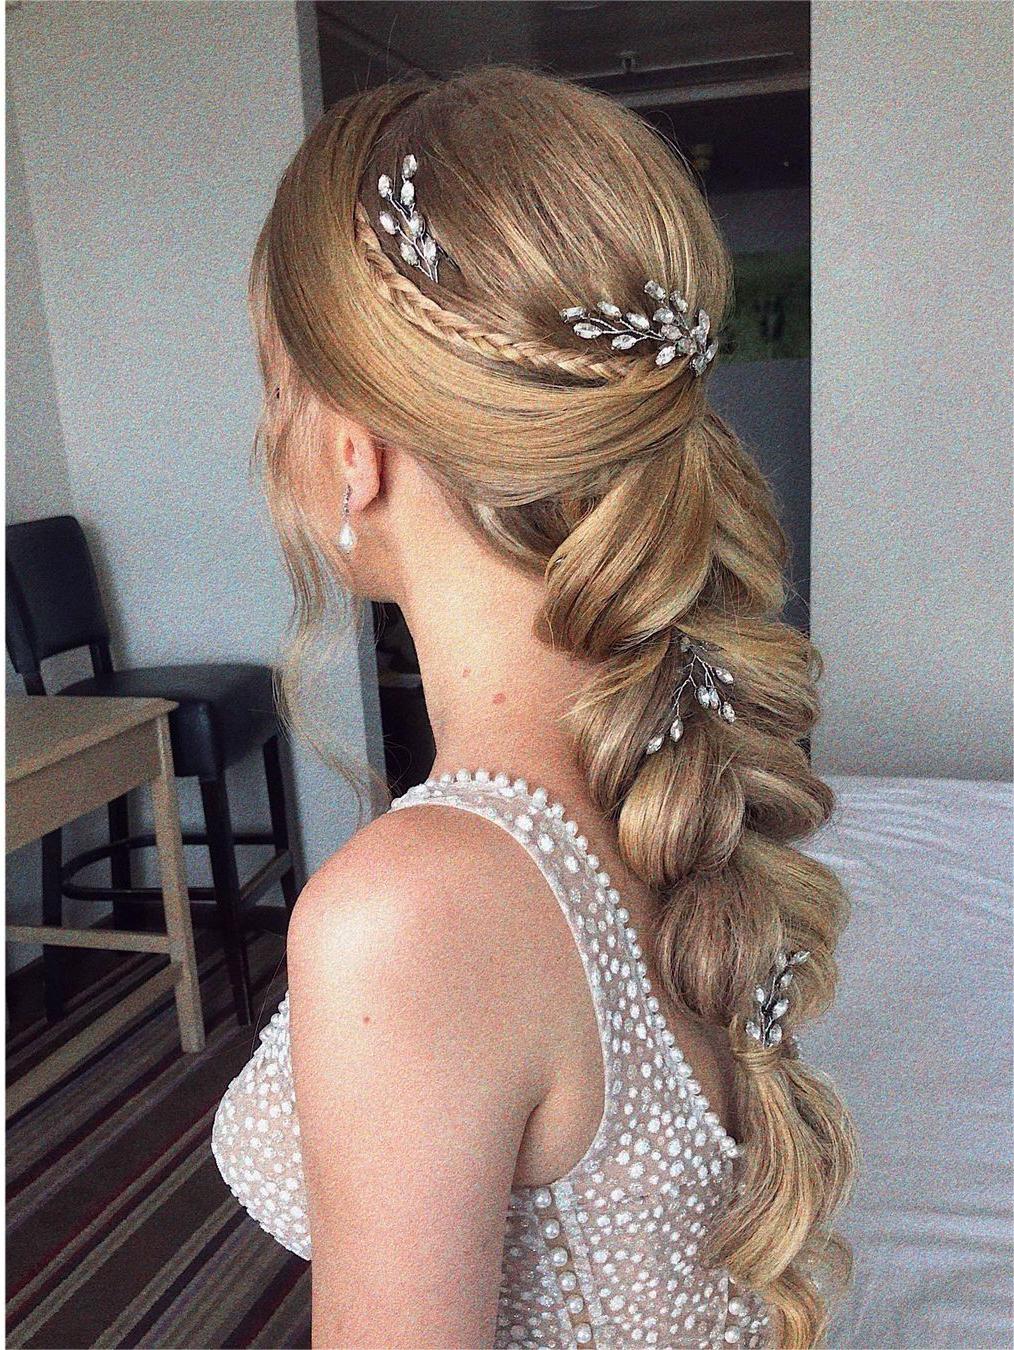 How to Create 4 Bridal Braid Hairstyles - The Wedding Community